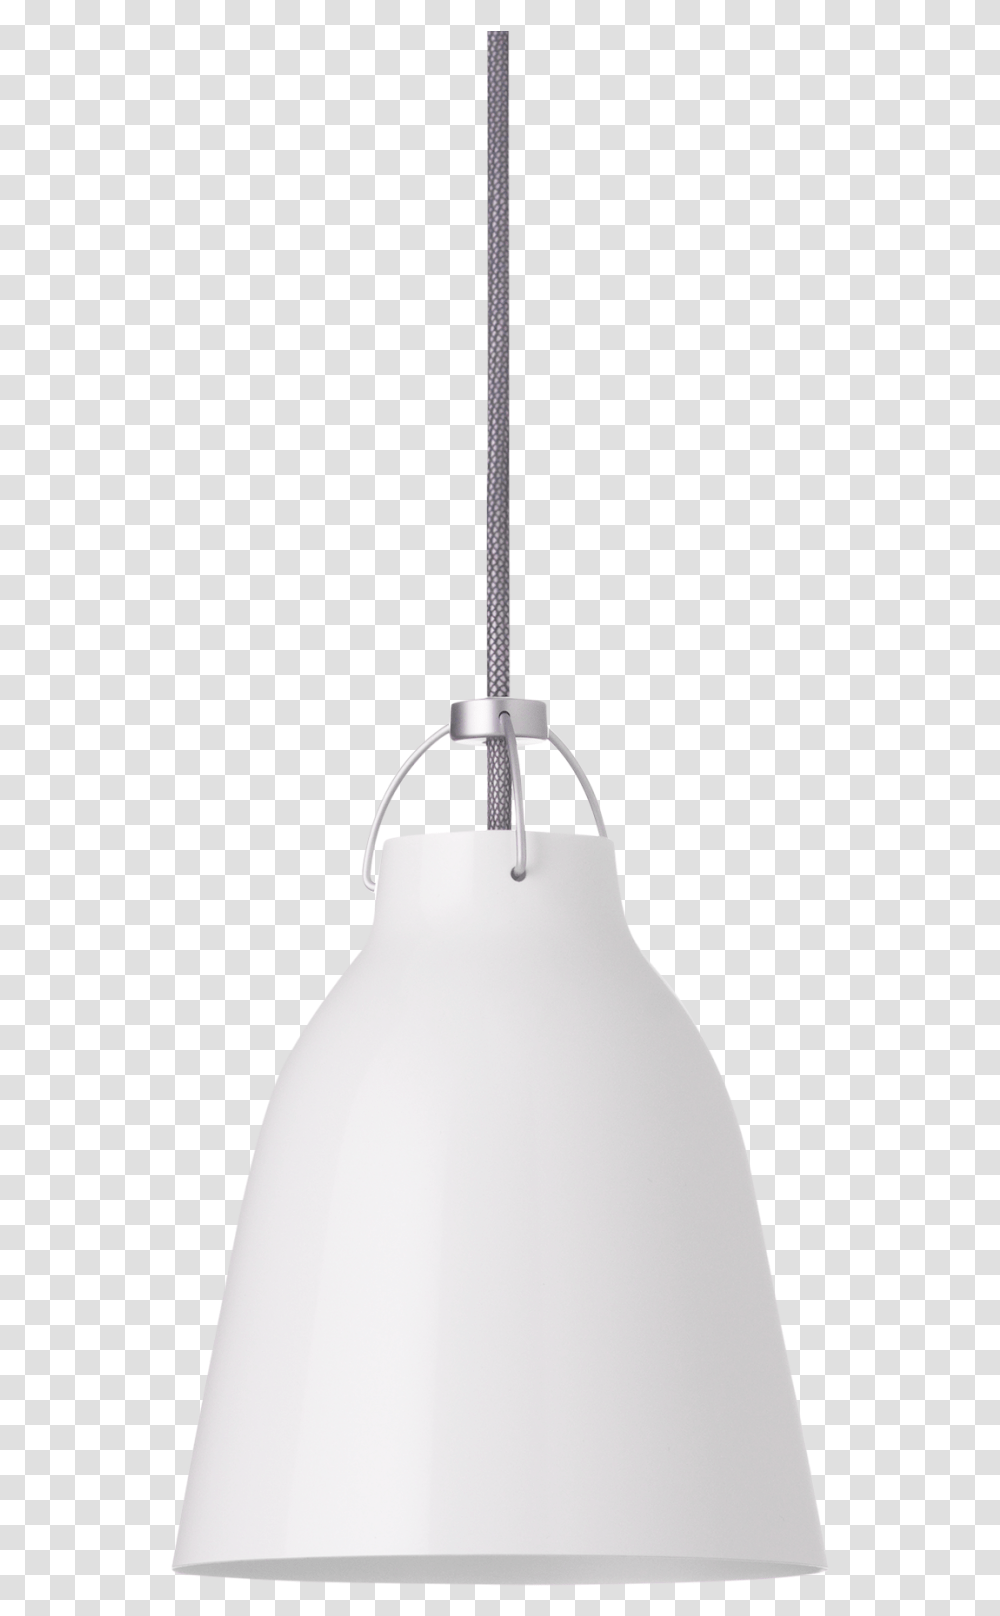 Caravaggio Pendant P1 Light Years Lampshade, Light Fixture, Cowbell, Bag Transparent Png